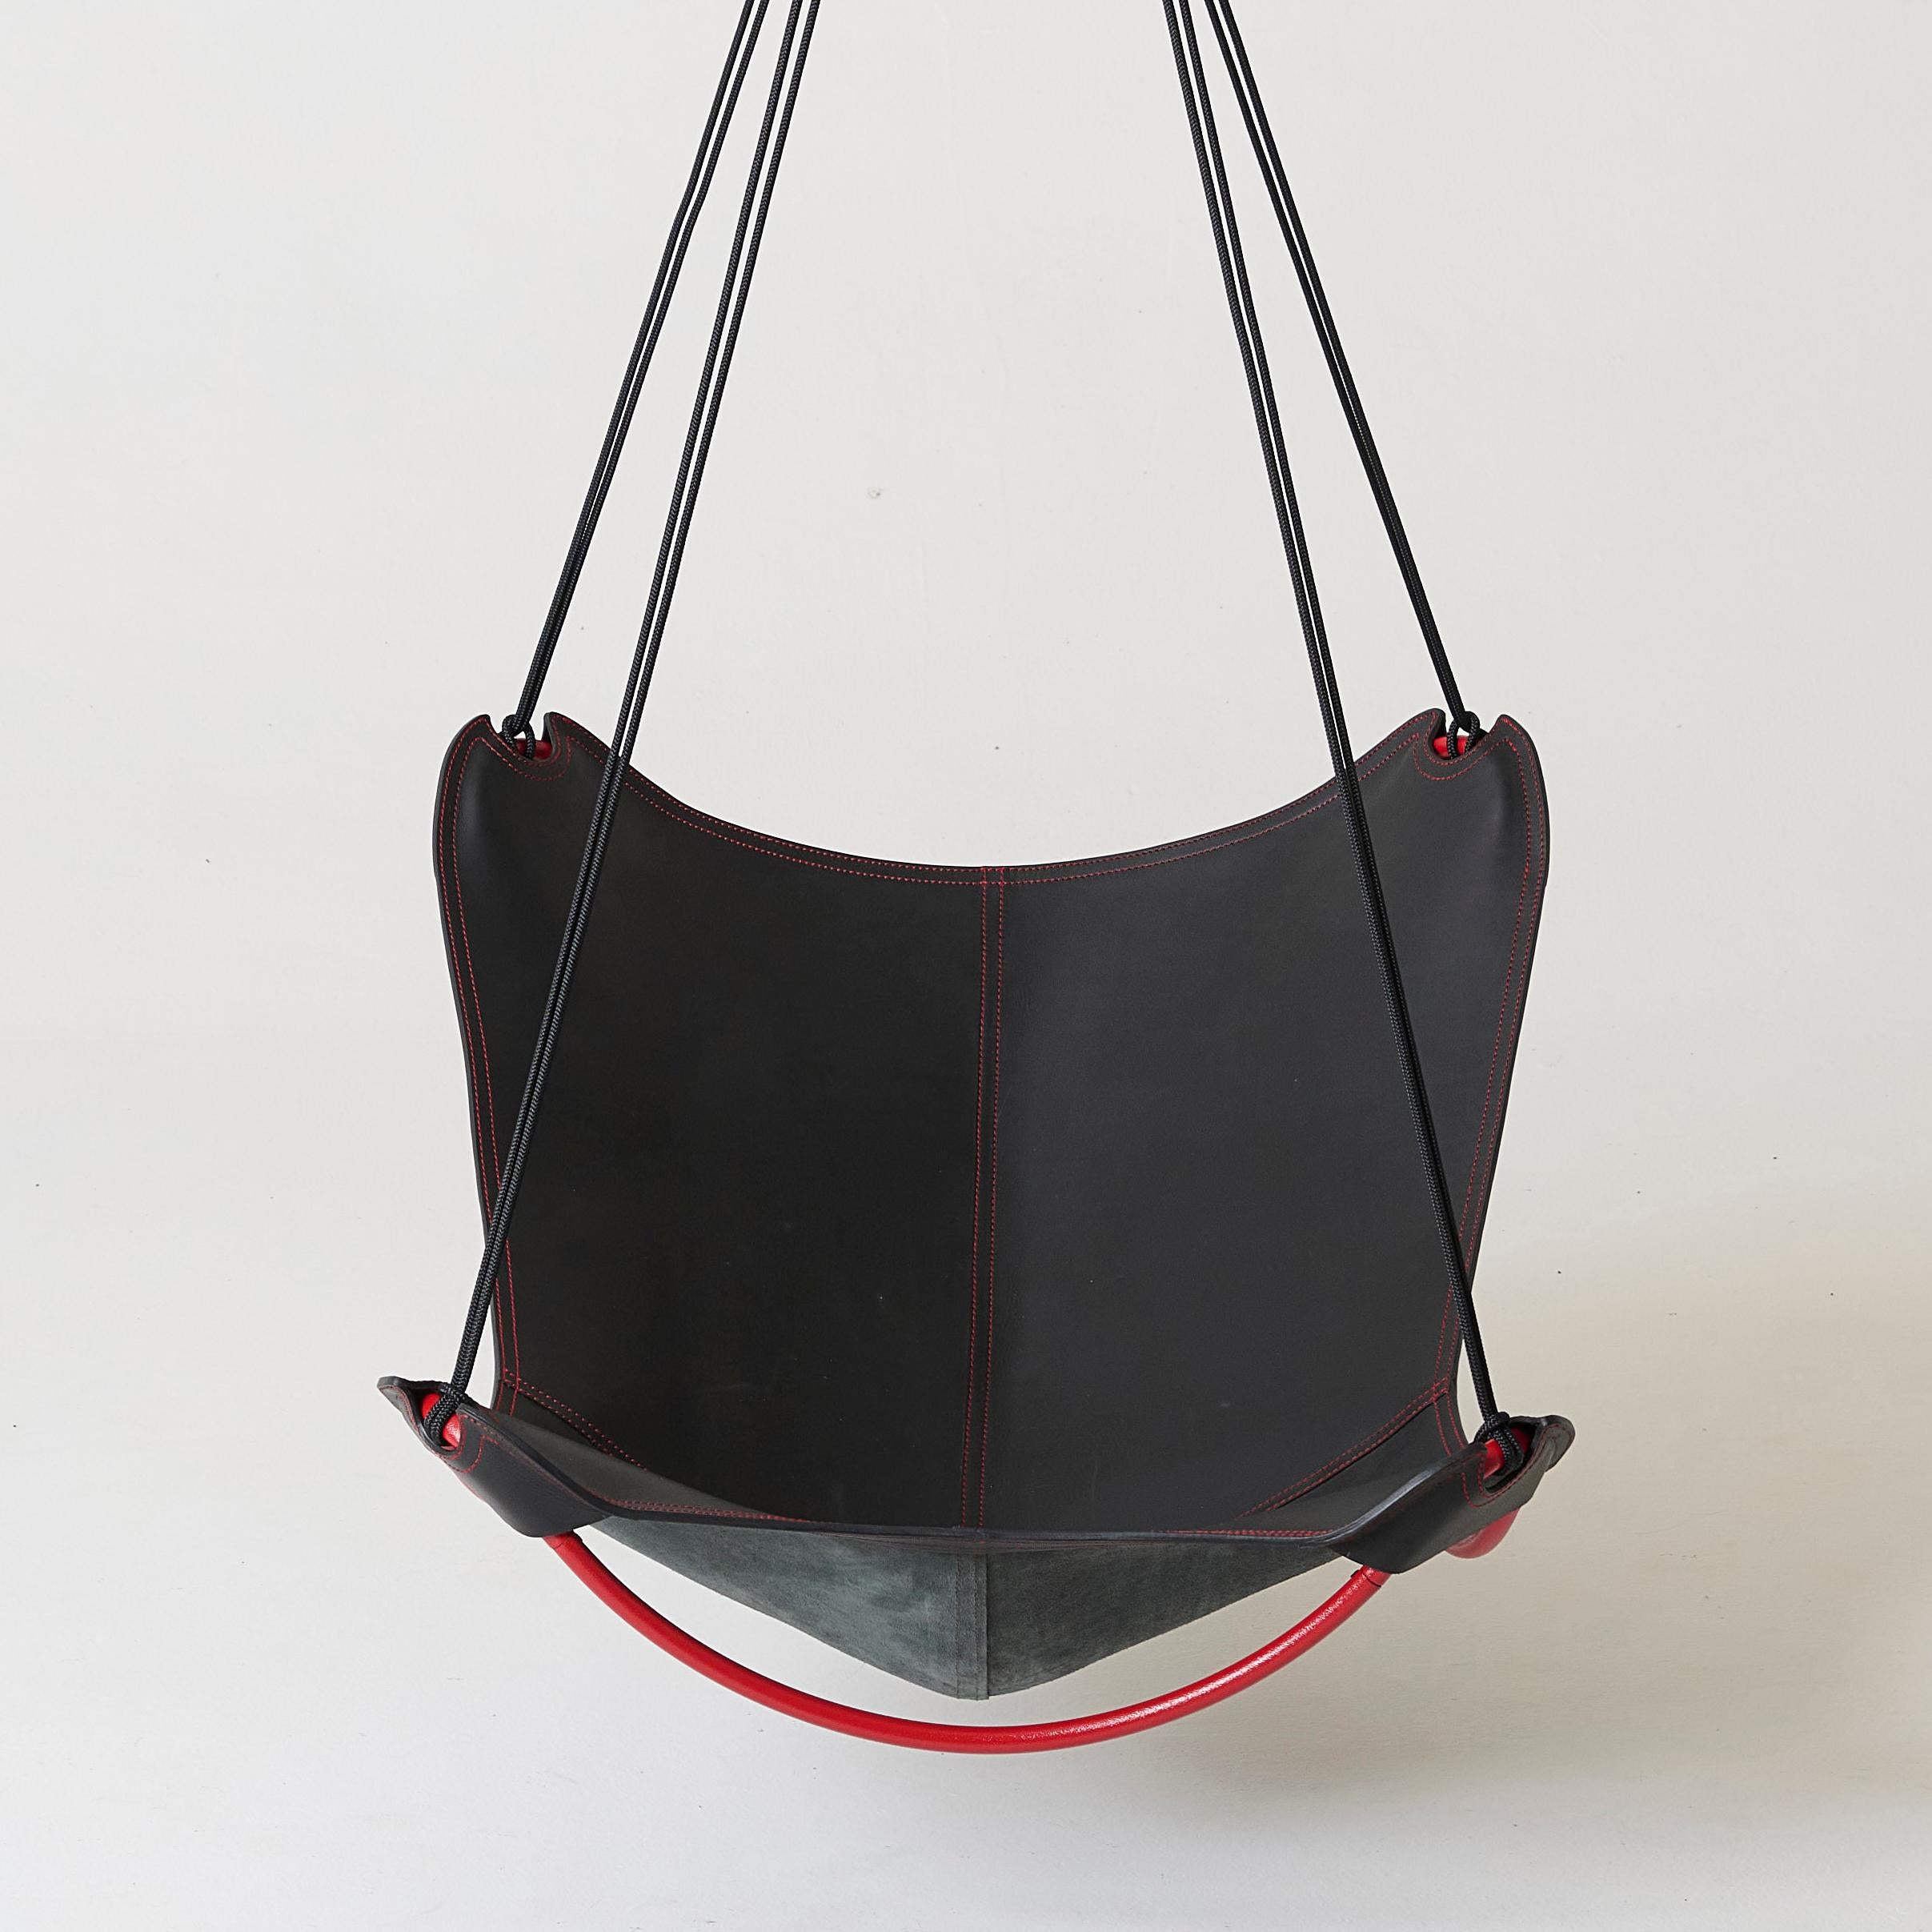 Welded Modern Black Leather ButterFLY Hanging Swing Chair with Red Detail For Sale